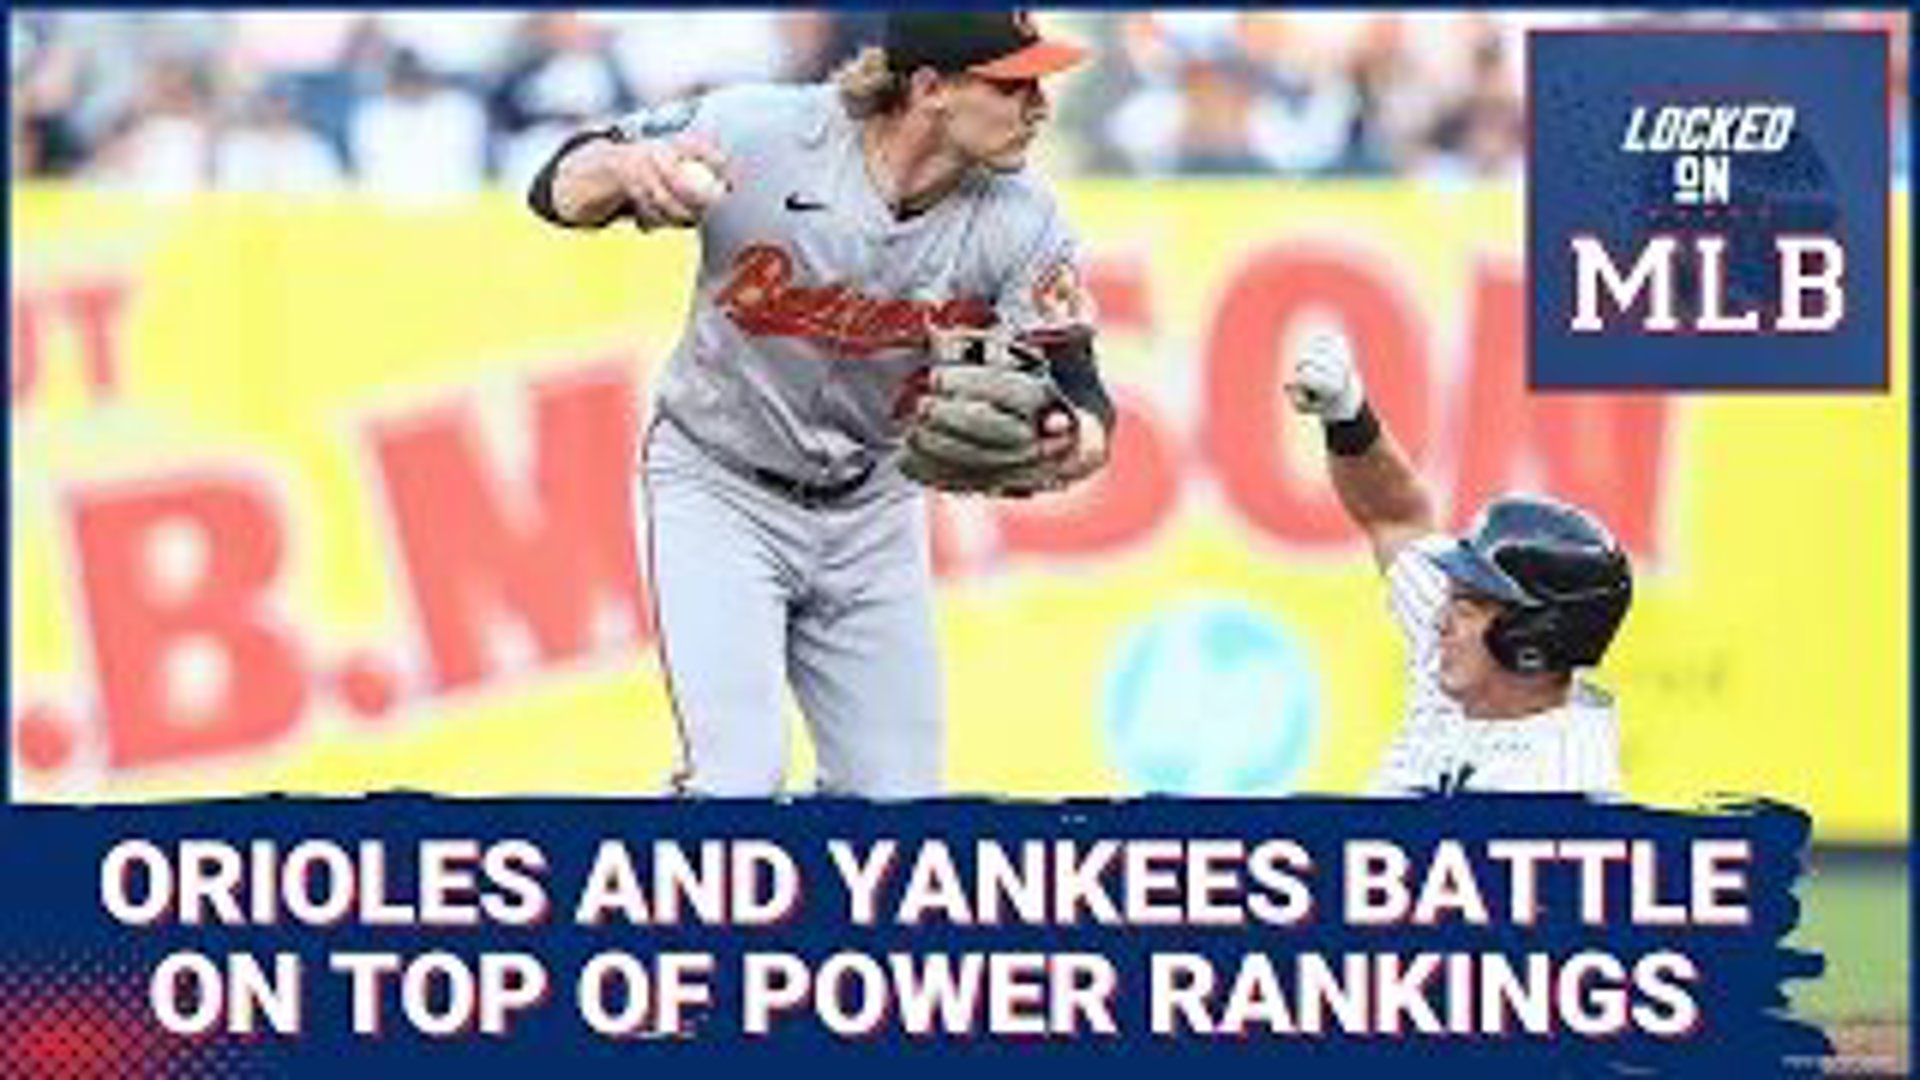 The Power Rankings show an absolute log jam of mediocre NL Teams with hope... meanwhile the Yankees and the Orioles remain the class of the American League.